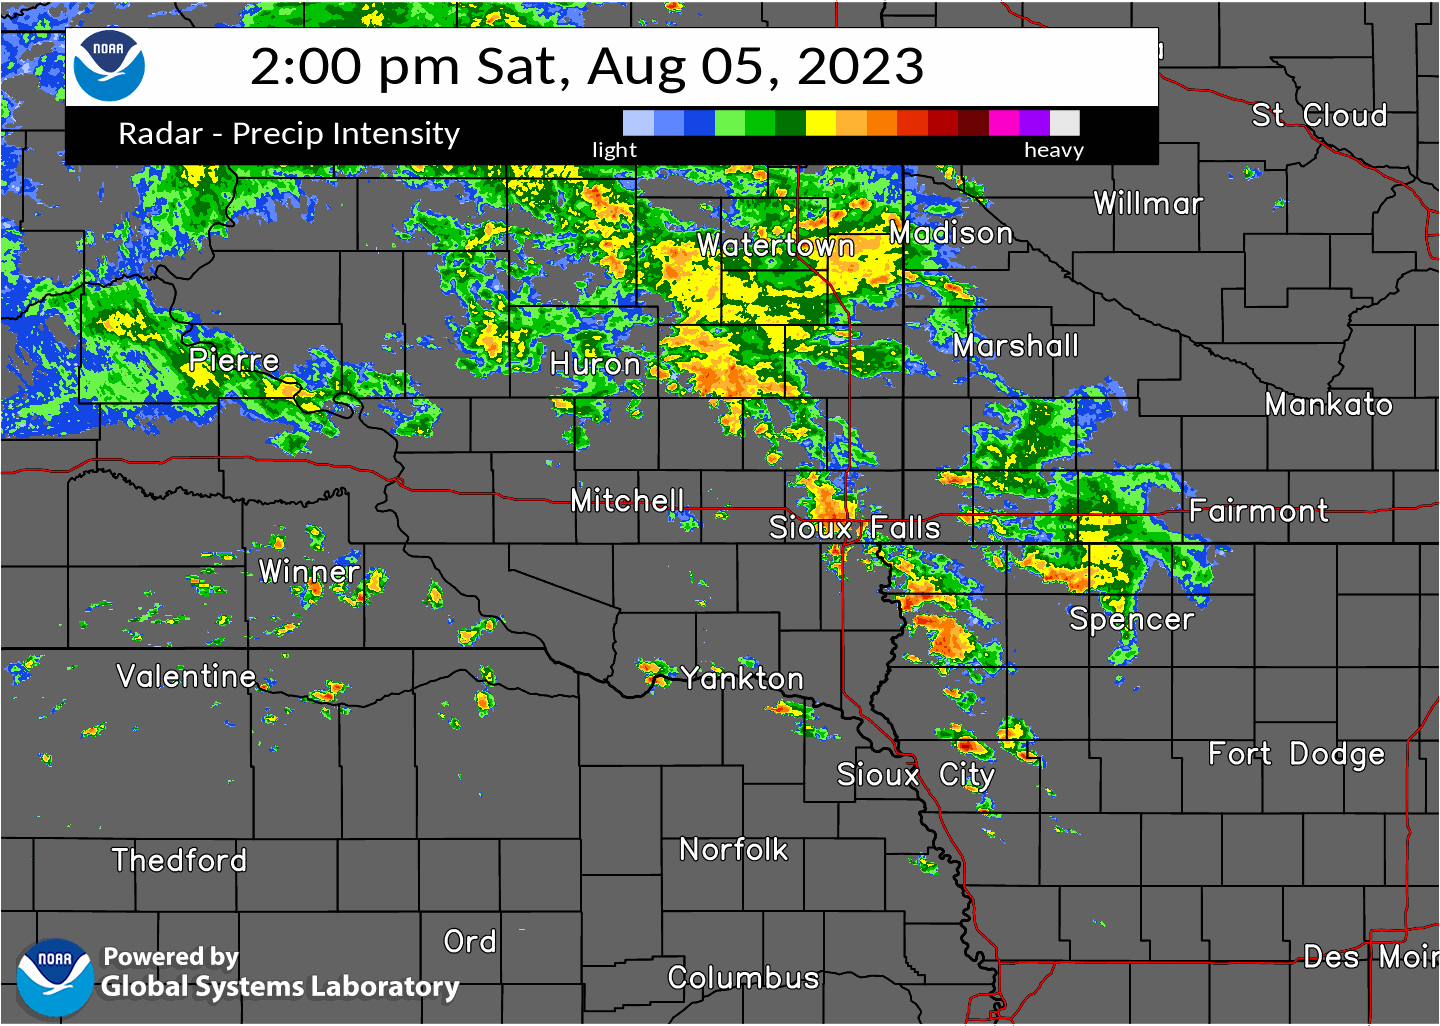 Radar loop over the forecast area from 2 PM to 8 PM on Saturday, August 5. The heaviest rainfall is focused near the Highway 14 corridor in Kingsbury county. Showers and storms continue for most of the loop duration across northwestern Iowa as well. Scattered showers and storms filter in over other portions of the area.